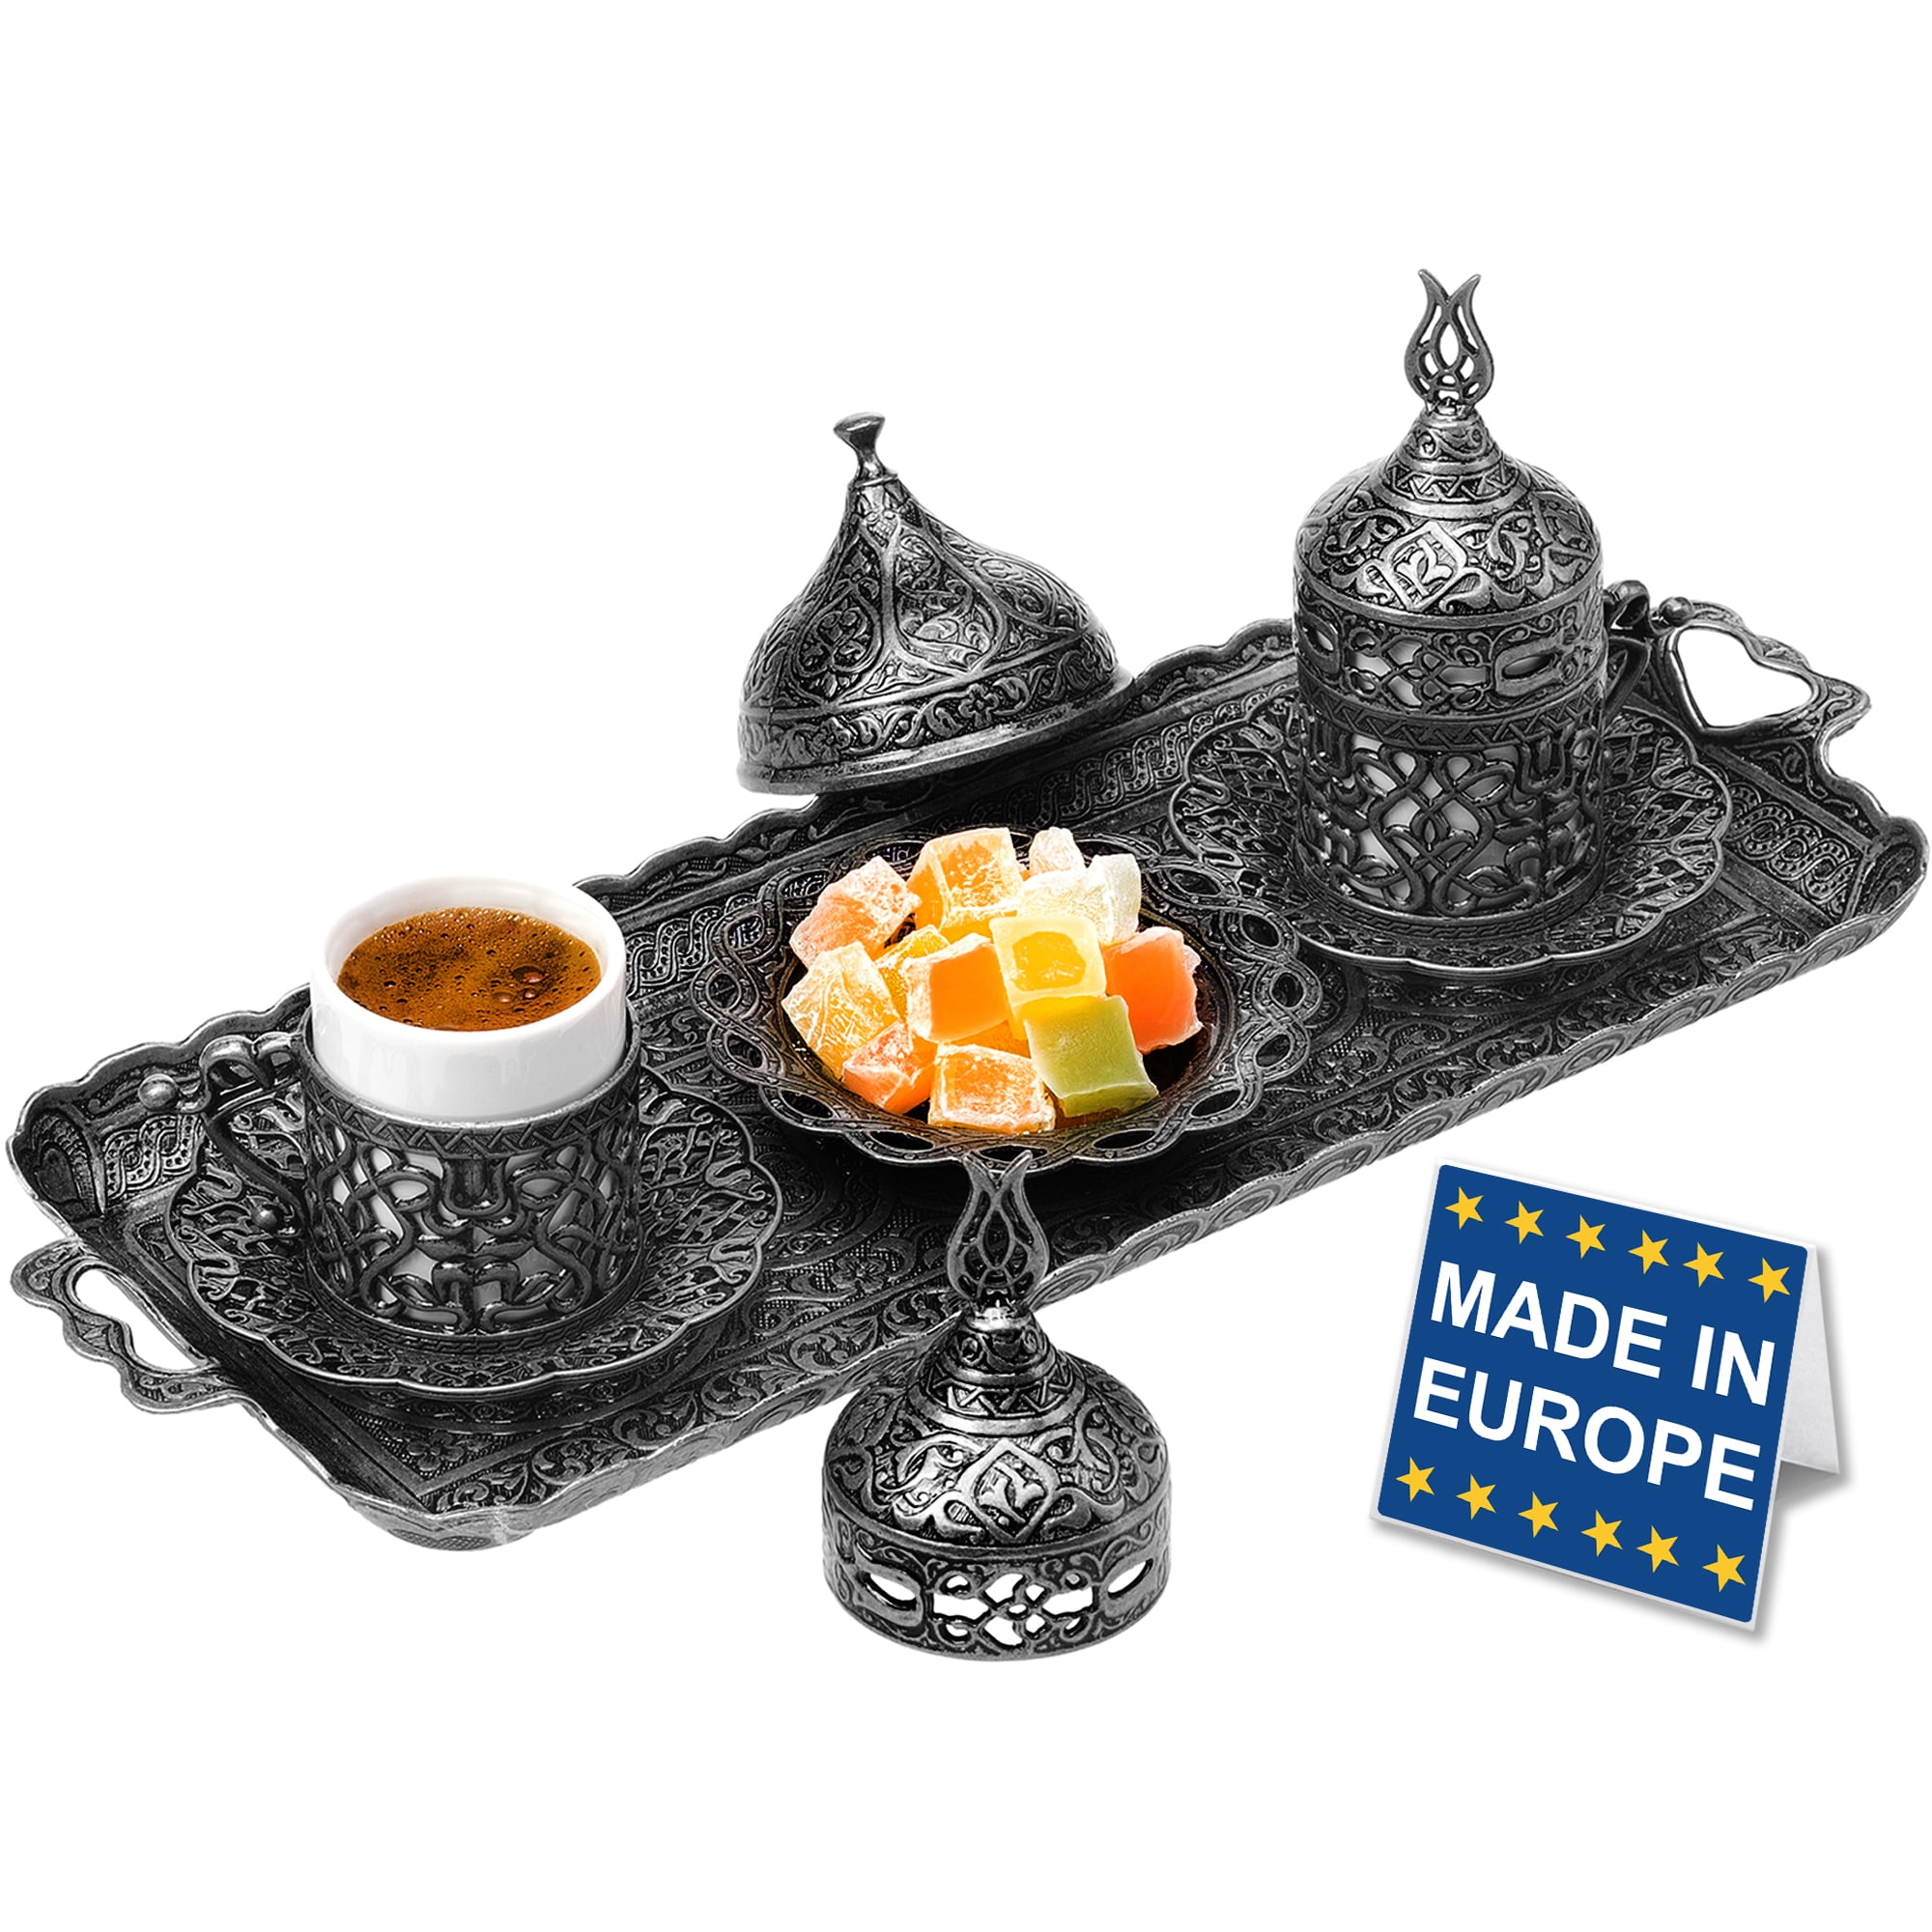 Turkish Coffee Serving Set-Coffee Porcelain Cup&Saucer,Coffee Maker Pot